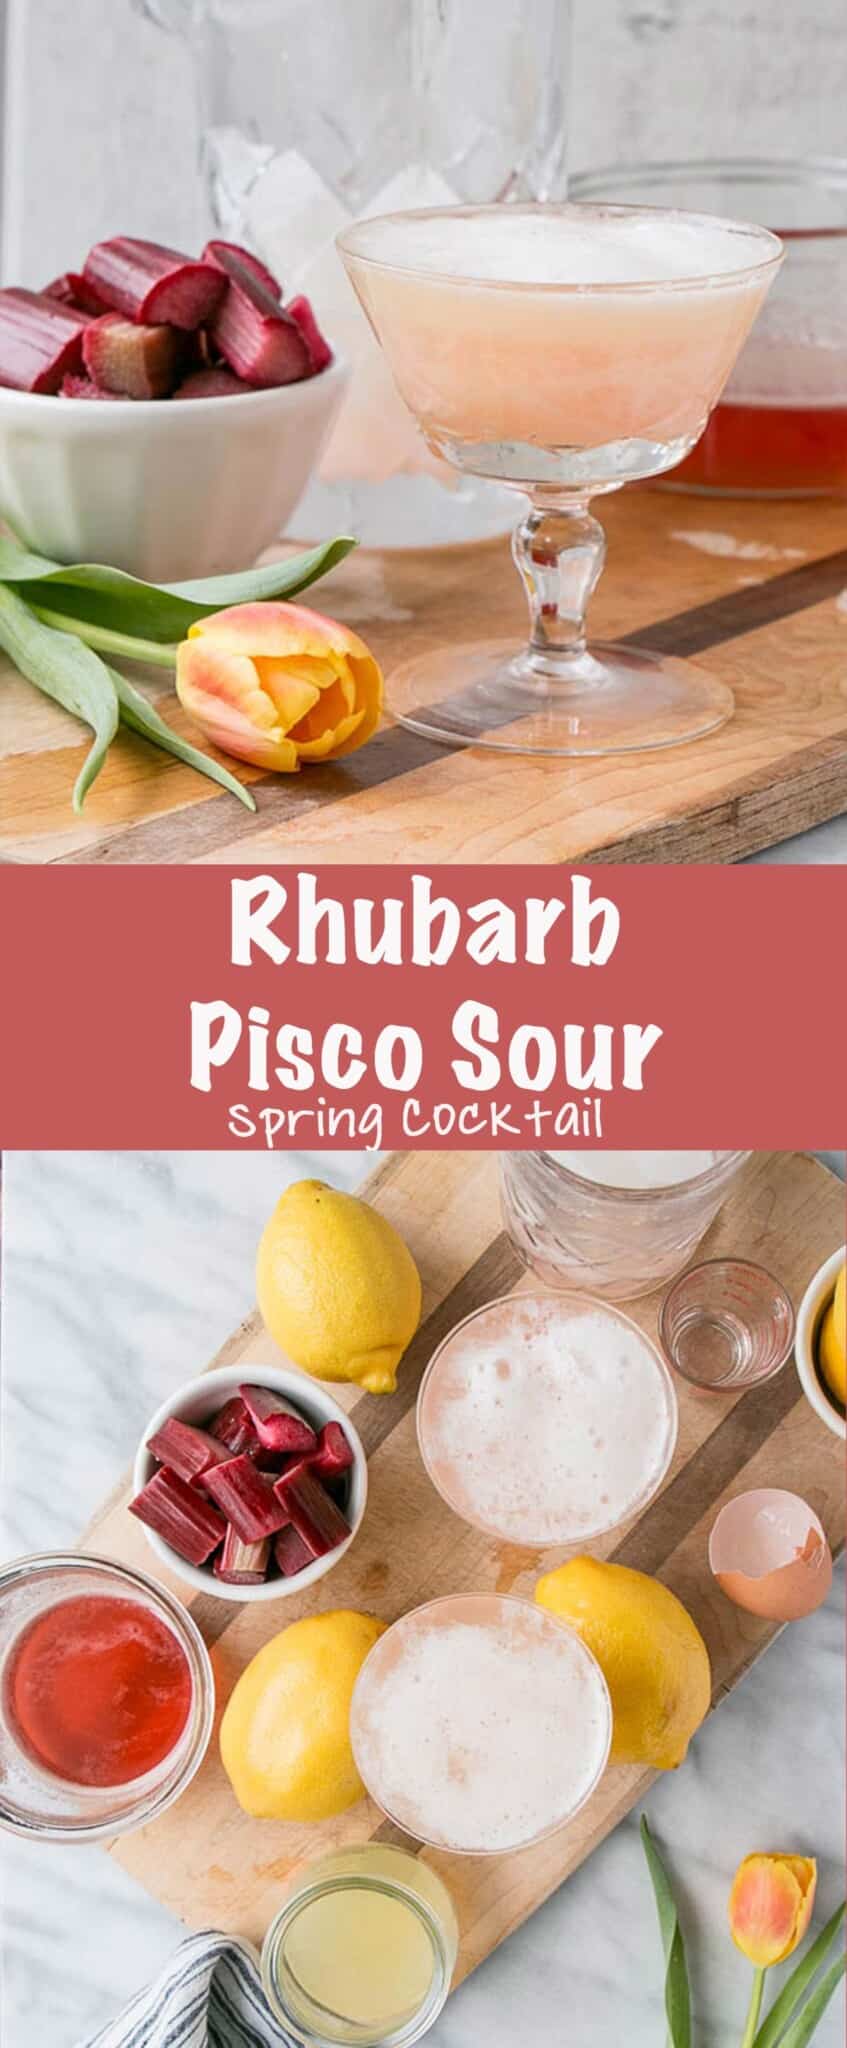 This Rhubarb Pisco Sour is a well-balanced mix of tart and sweetness. A great way to usher in Spring with a seasonal cocktail. via @mykitchenlove